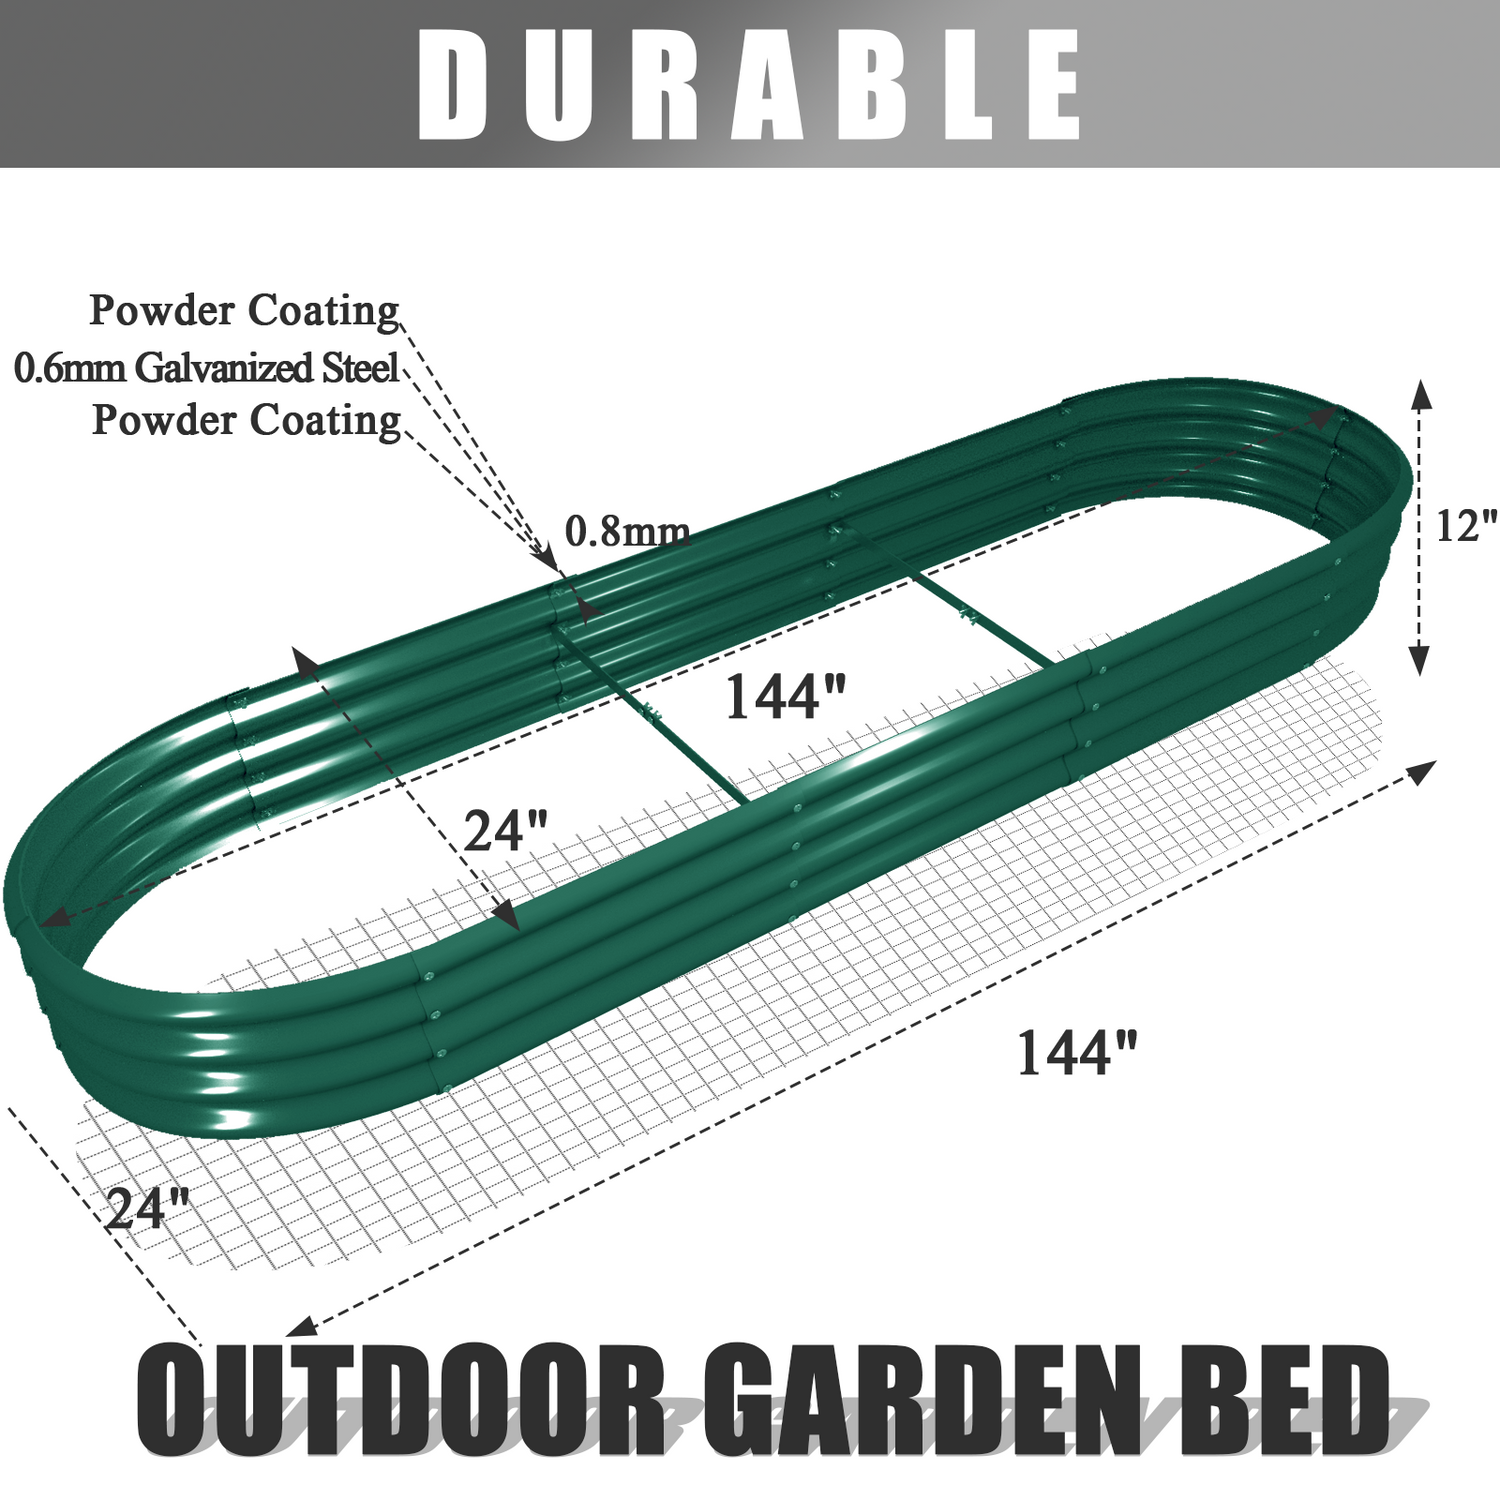 Bundle of 8 | 12" Tall 12x2ft Oval Metal Raised Garden Bed in Green with Gopher Wire Mesh